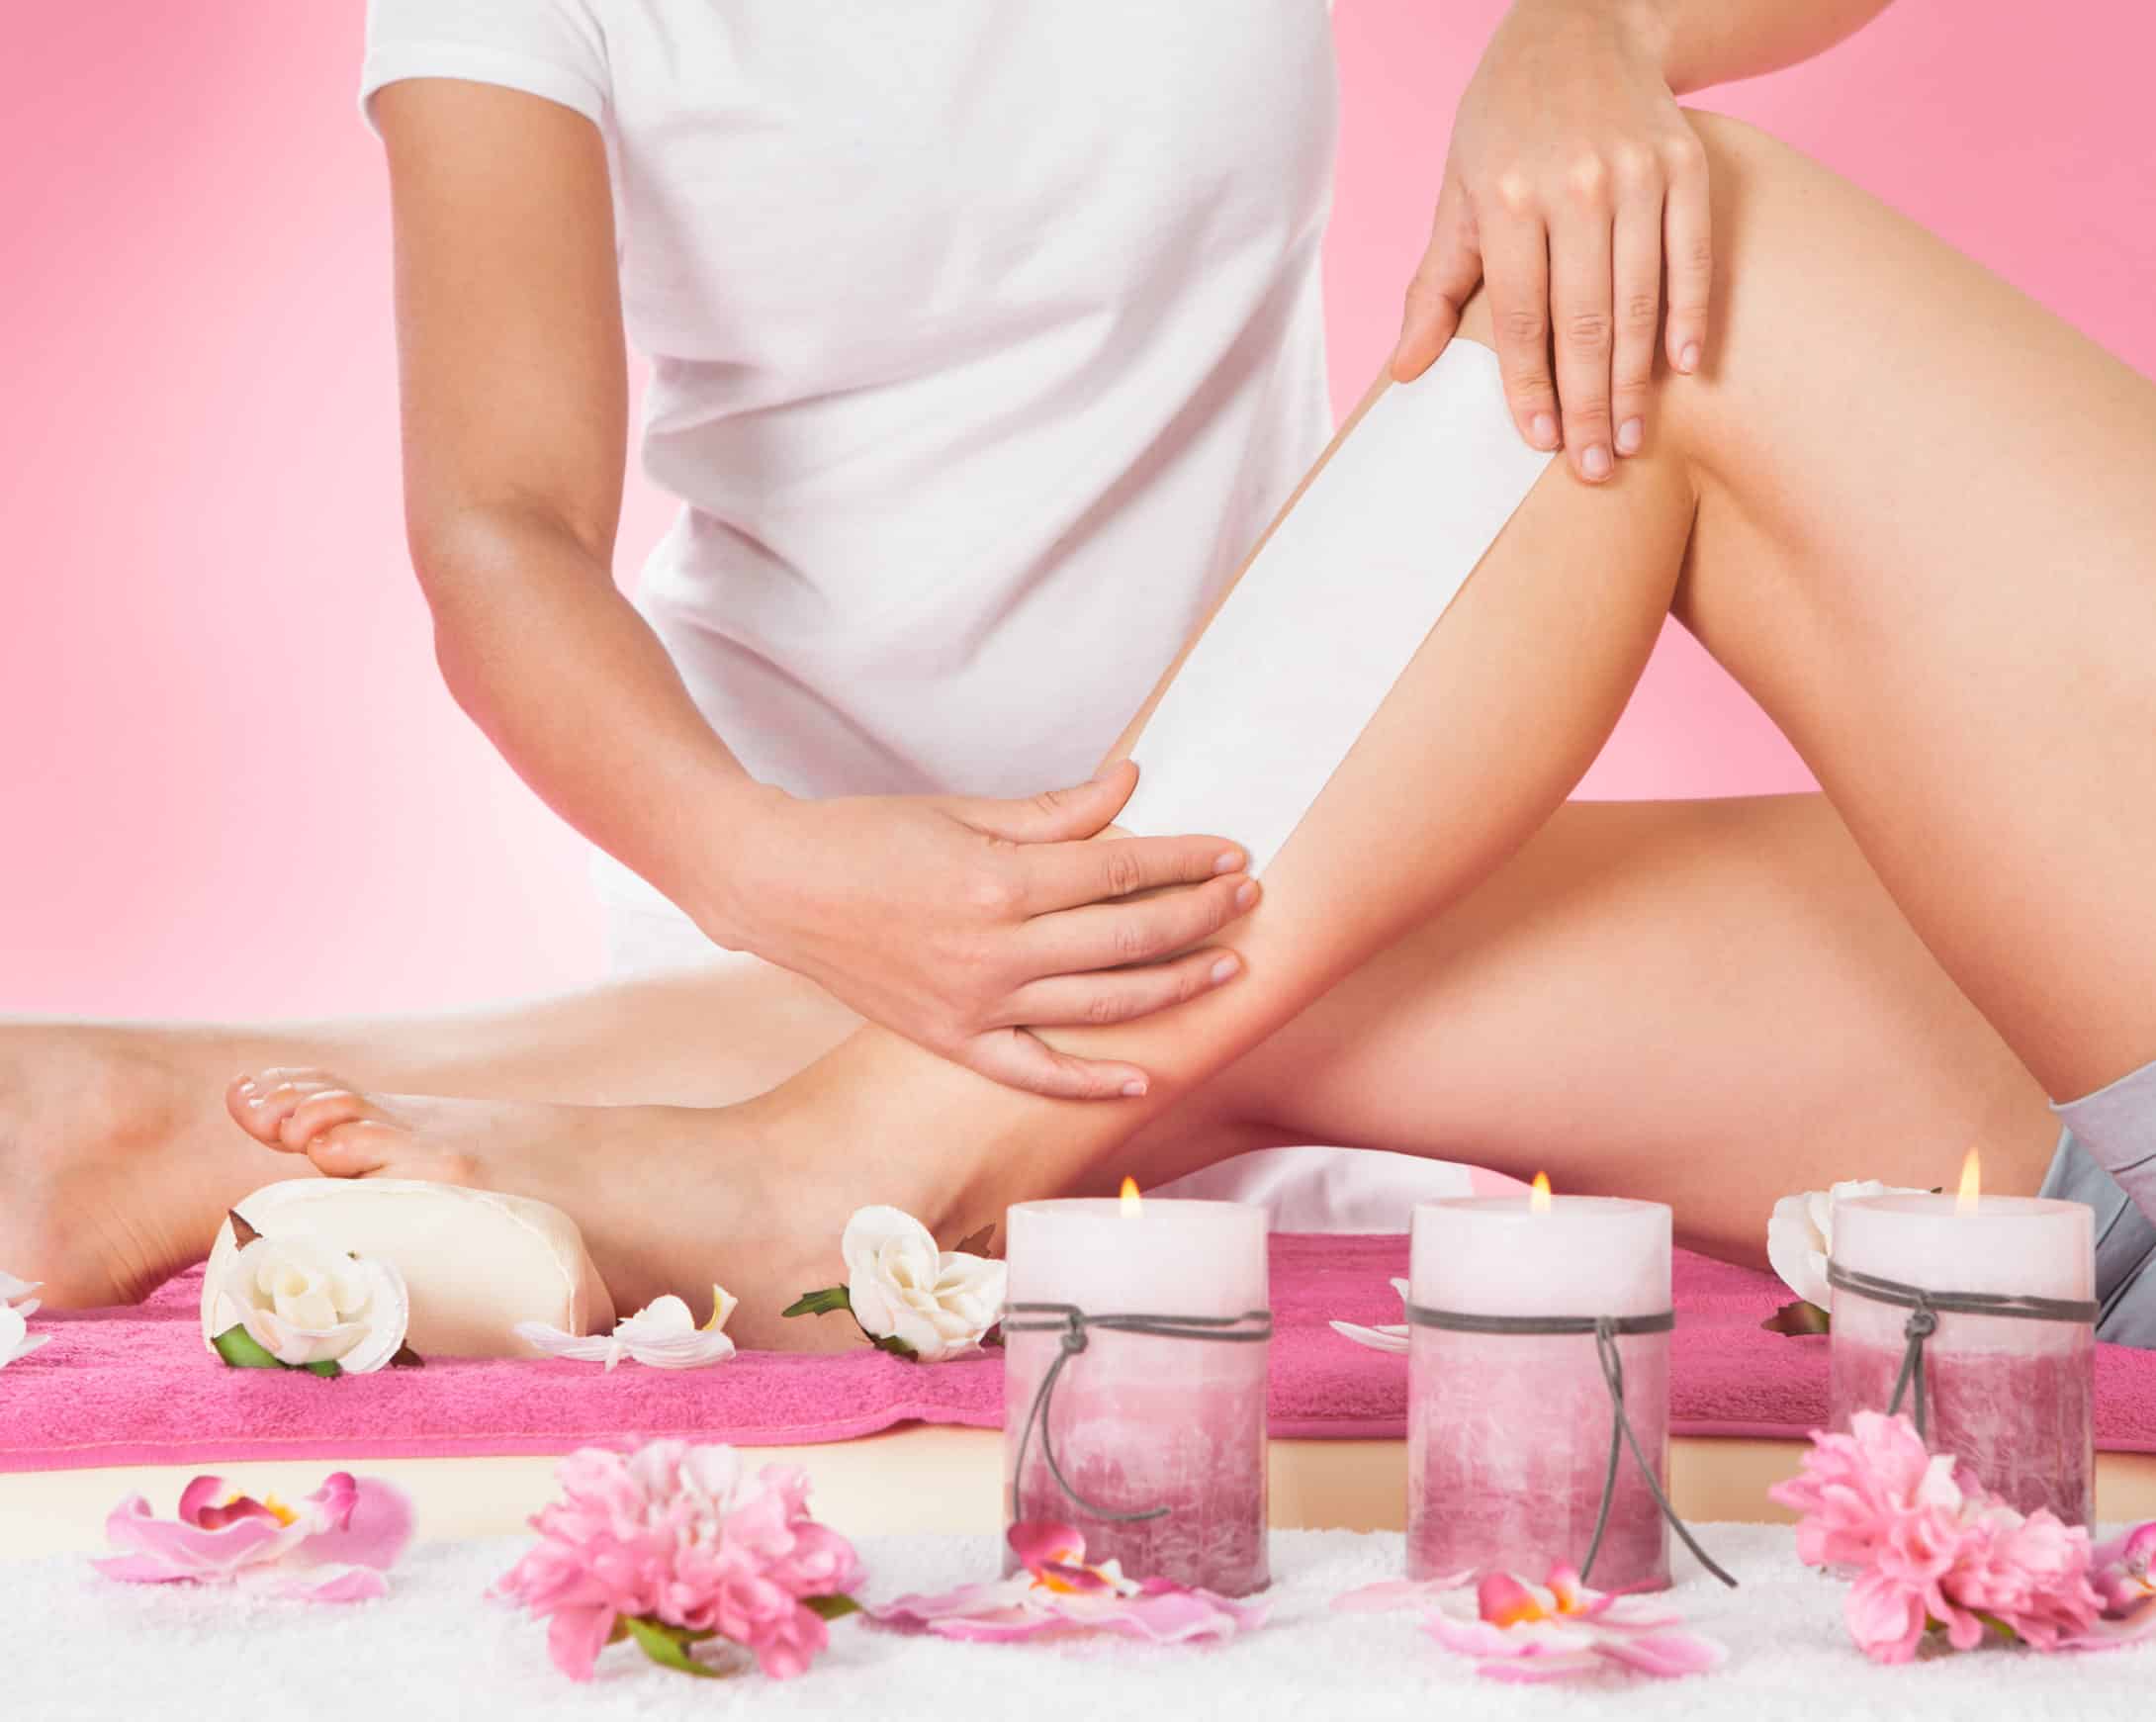 Midsection of female therapist waxing customer's leg at beauty spa